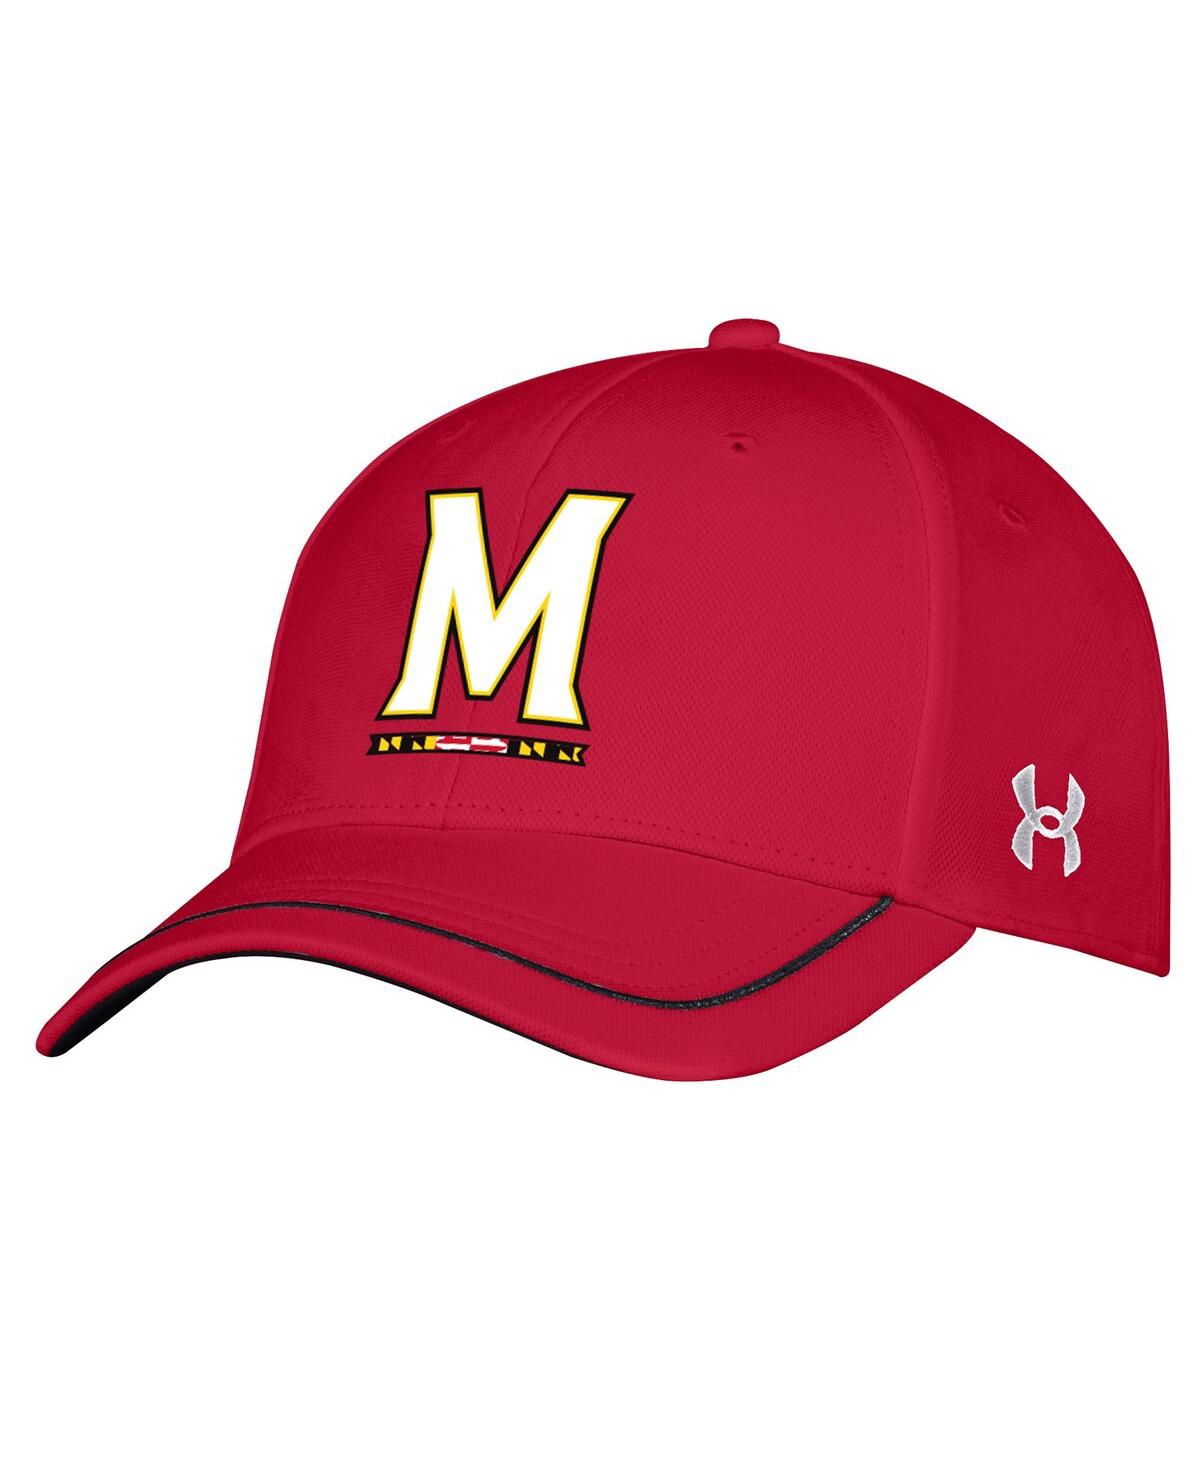 Shop Under Armour Men's  Red Maryland Terrapins Blitzing Accent Iso-chill Adjustable Hat